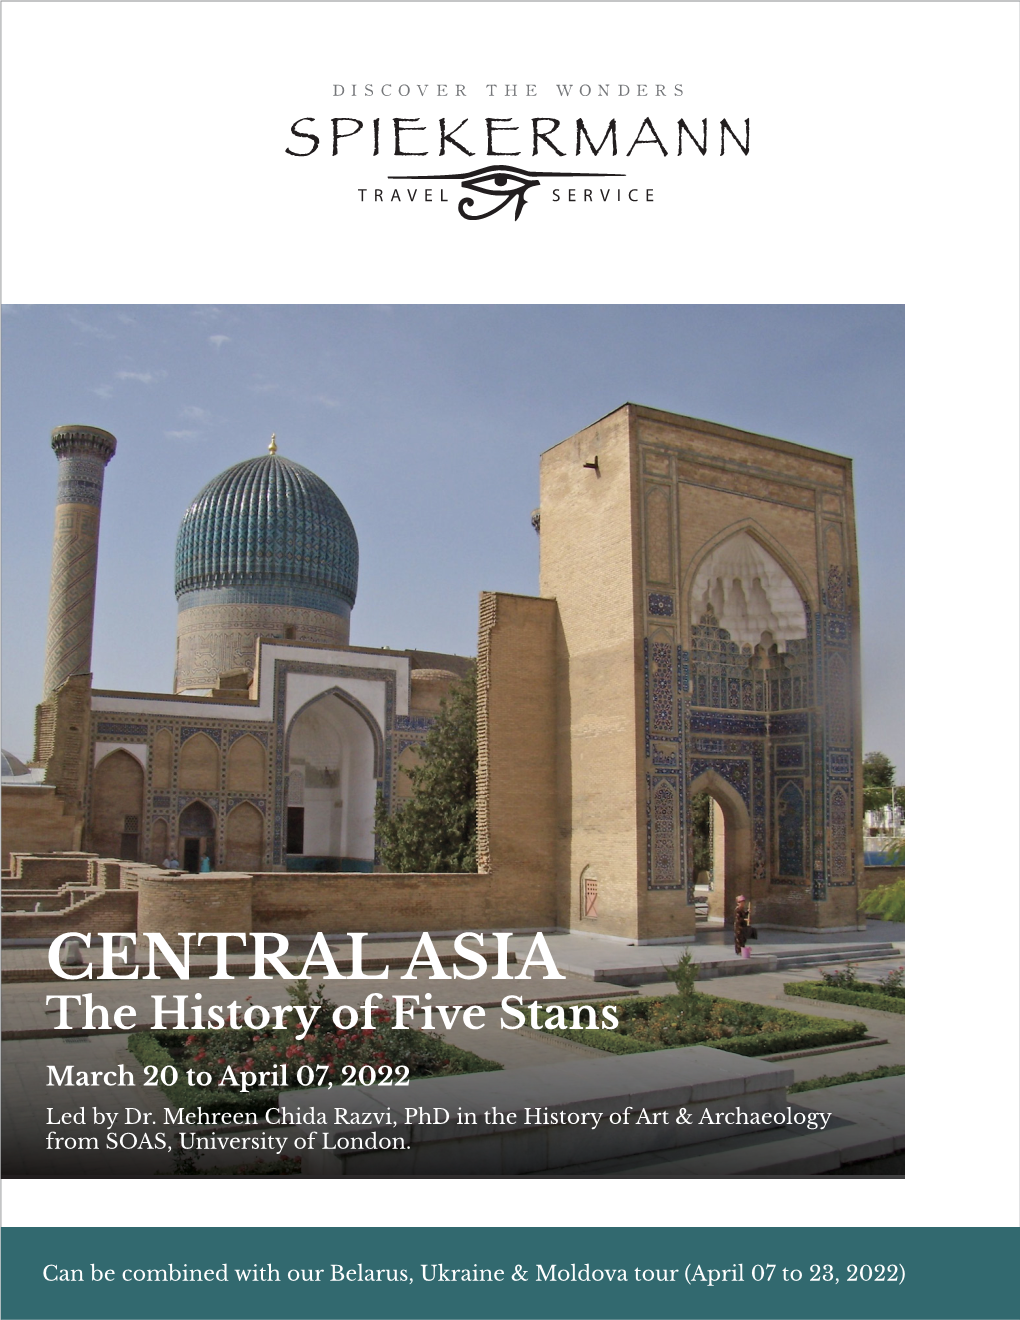 CENTRAL ASIA the History of Five Stans